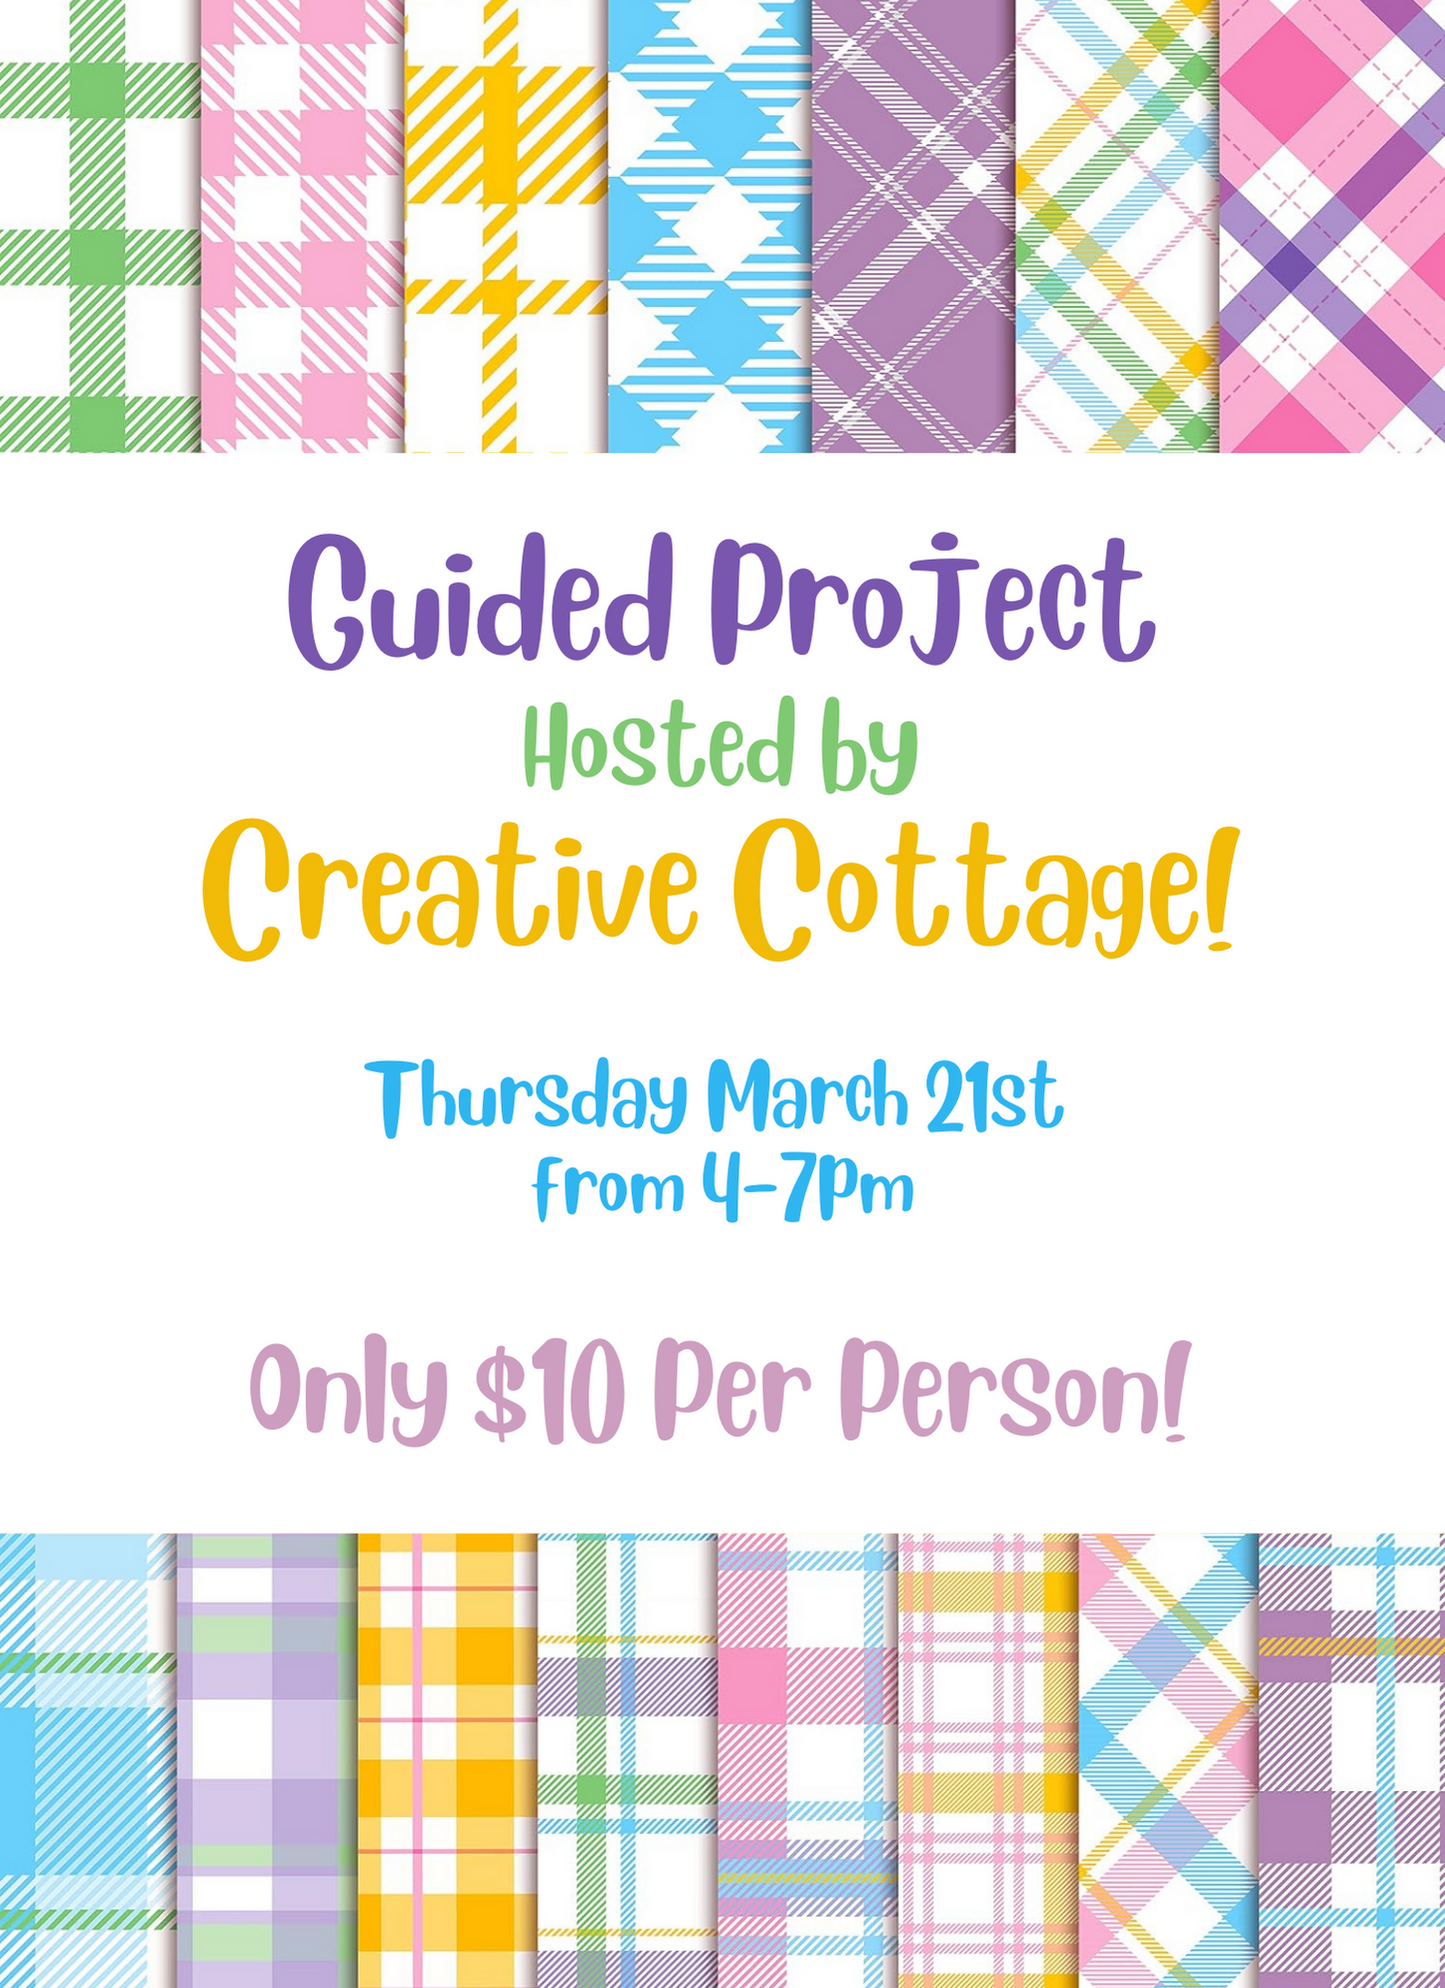 Guided Project - Hosted by Creative Cottage